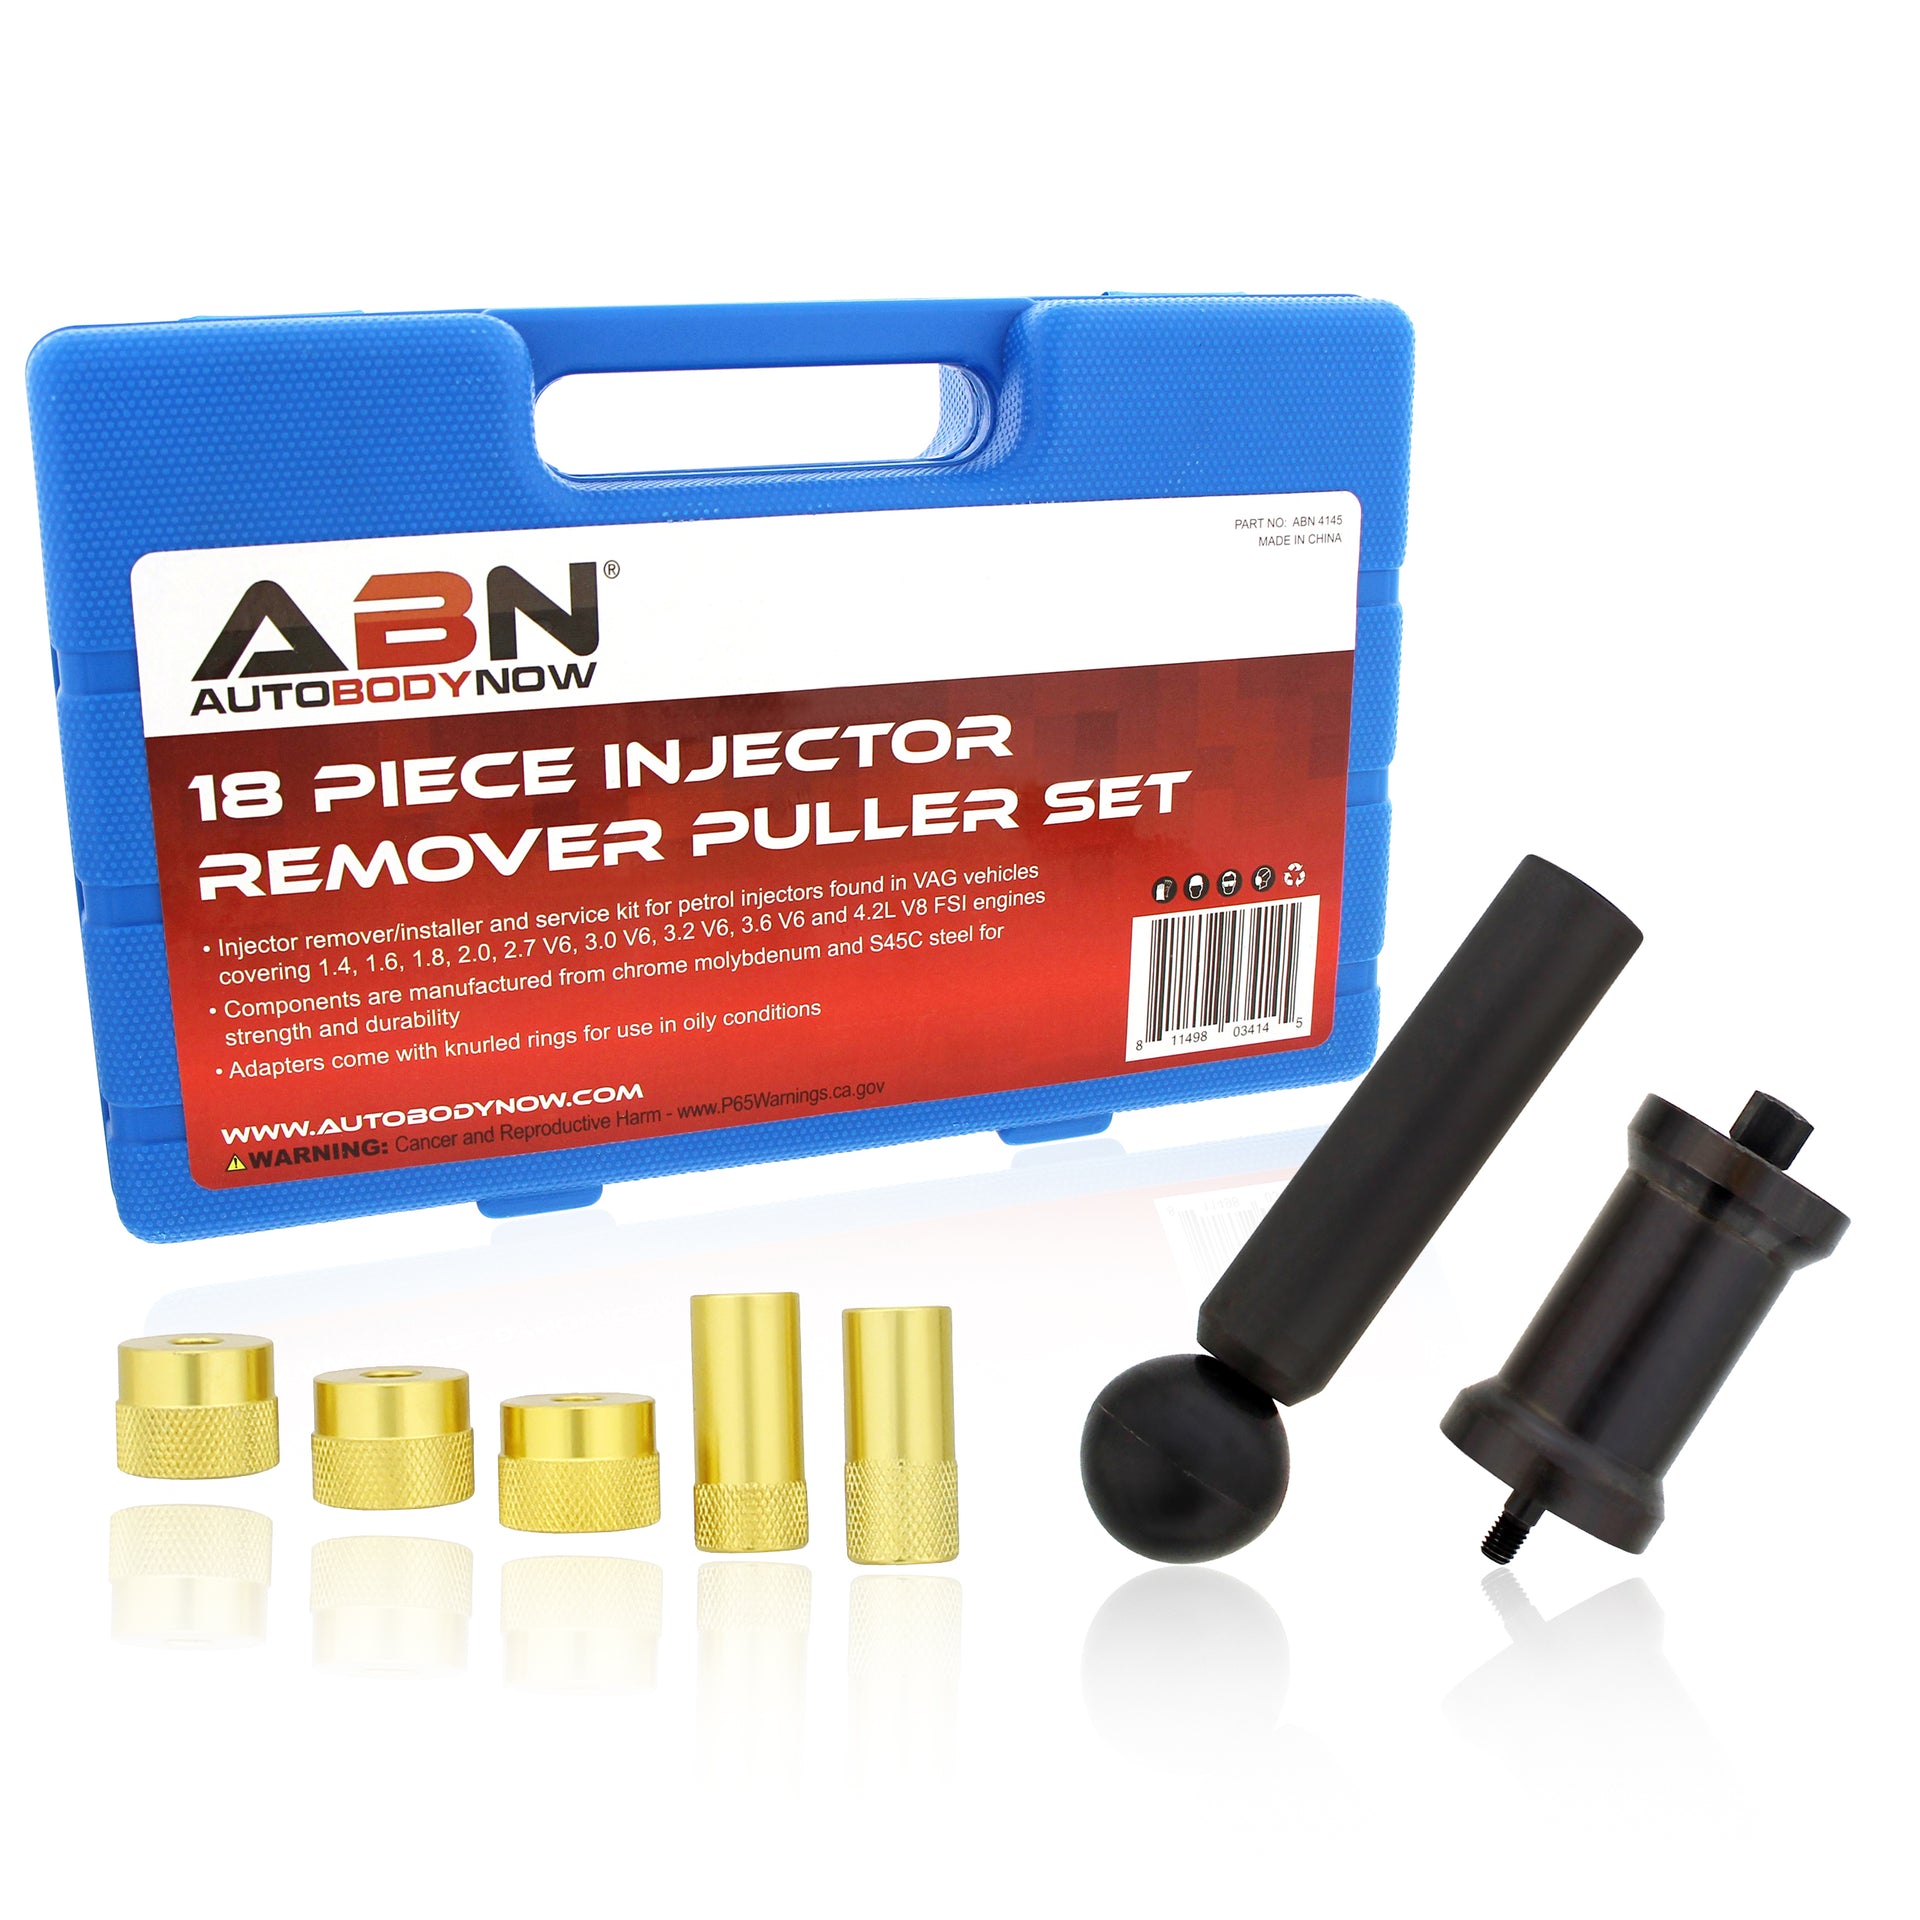 Fuel Injector Puller Removal Set Injector Seal Installer Service Tool Kit  Compatible with Audi VW 1.4 1.6 1.8 2.0 2.7 3.0 3.2 3.6 V6 4.2 V8 FSI TSI